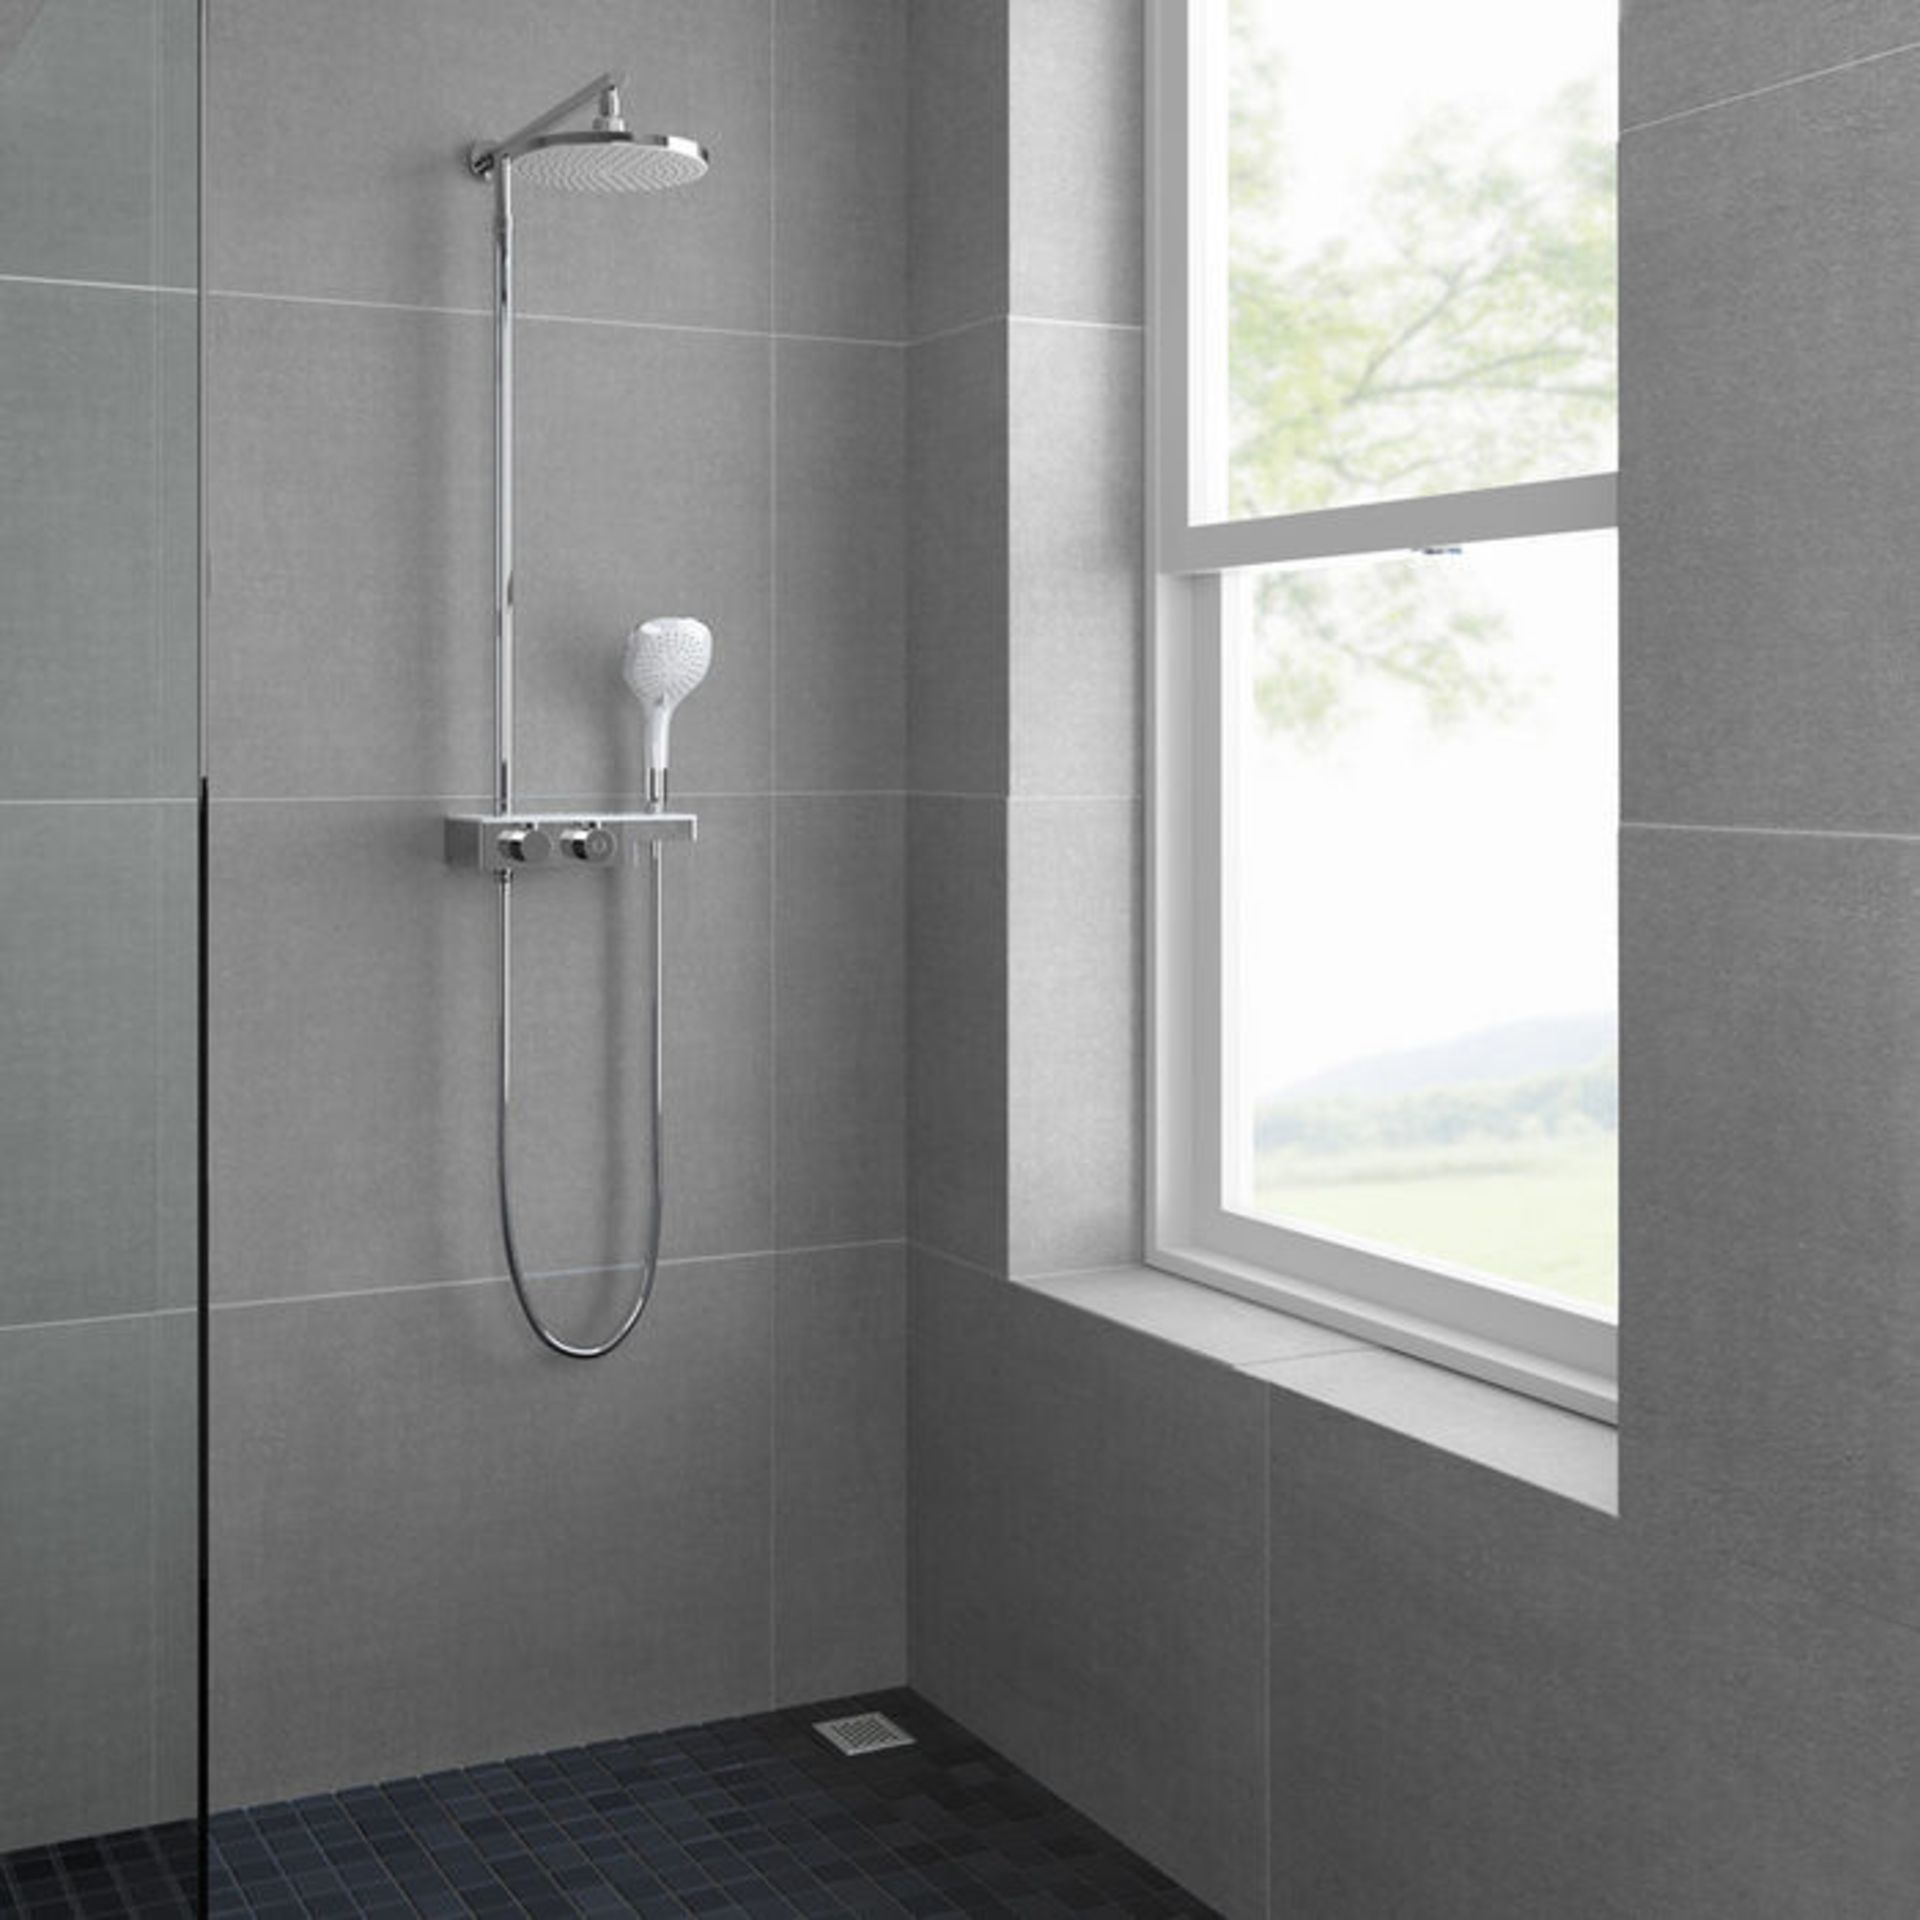 (OS122) Round Exposed Thermostatic Mixer Shower Kit Medium Head & Shelf. RRP £349.99. Cool to - Image 4 of 4